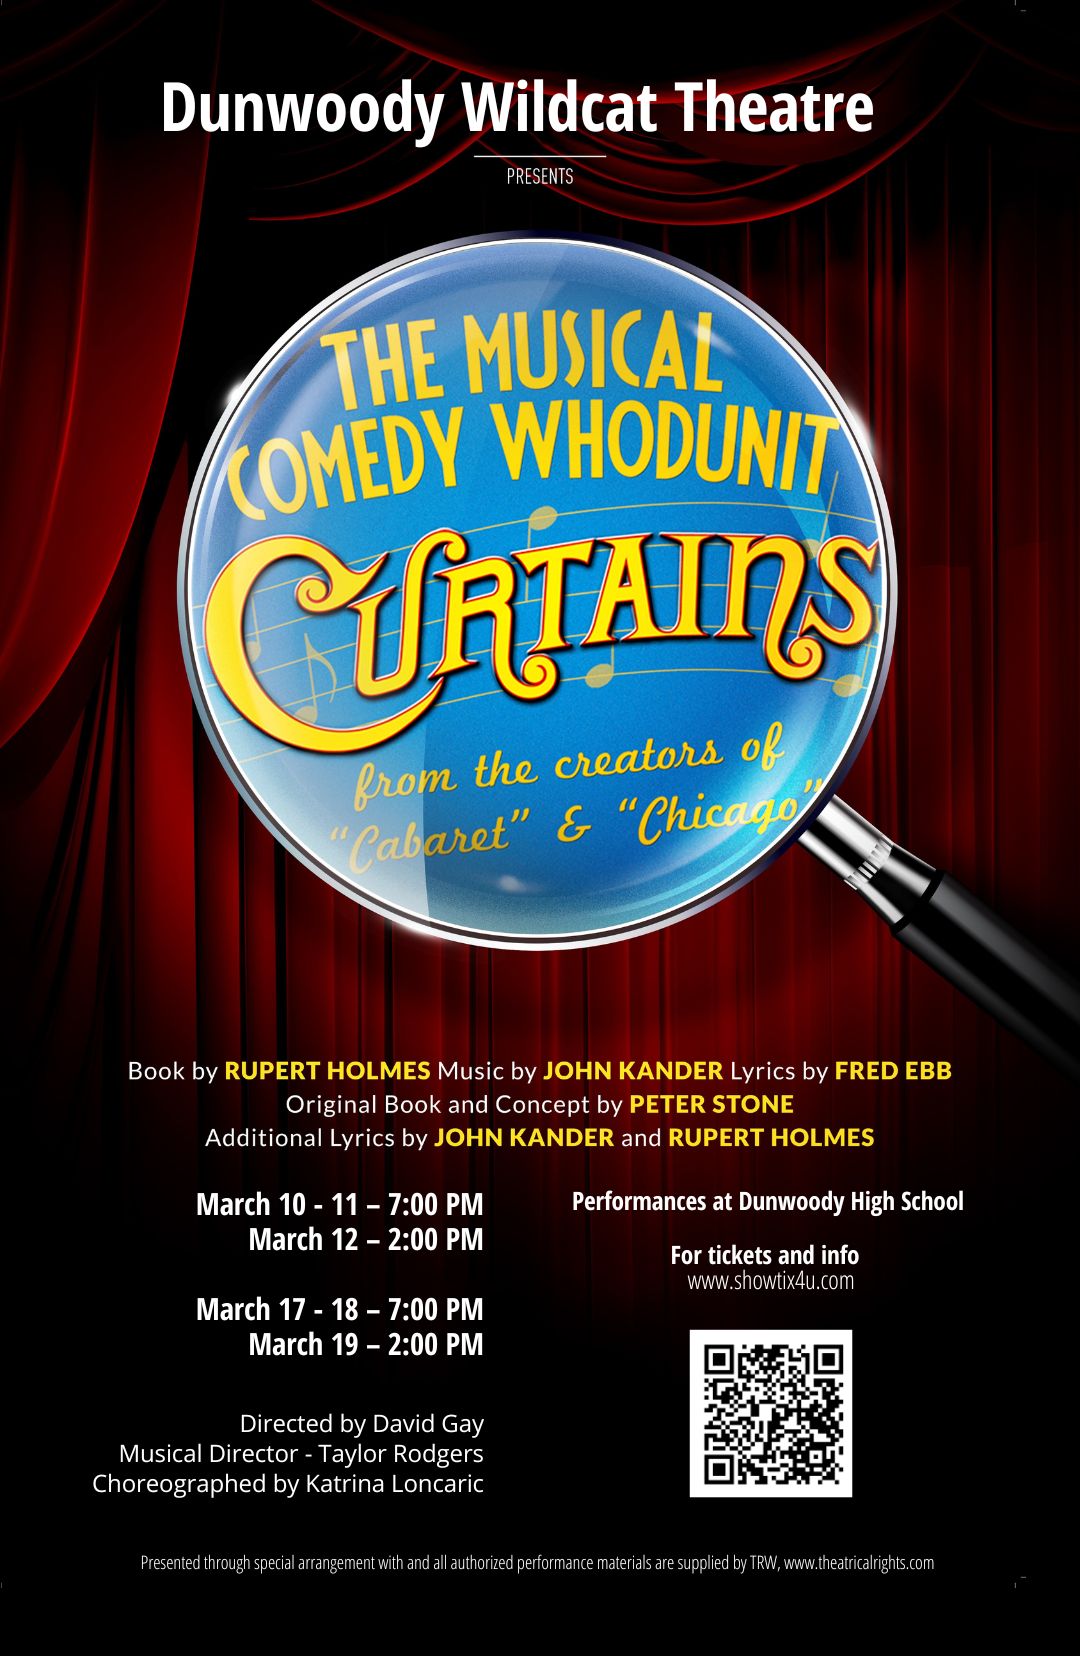 Dunwoody Wildcat Theatre Presents "Curtains" - a Musical Comedy Whodunit